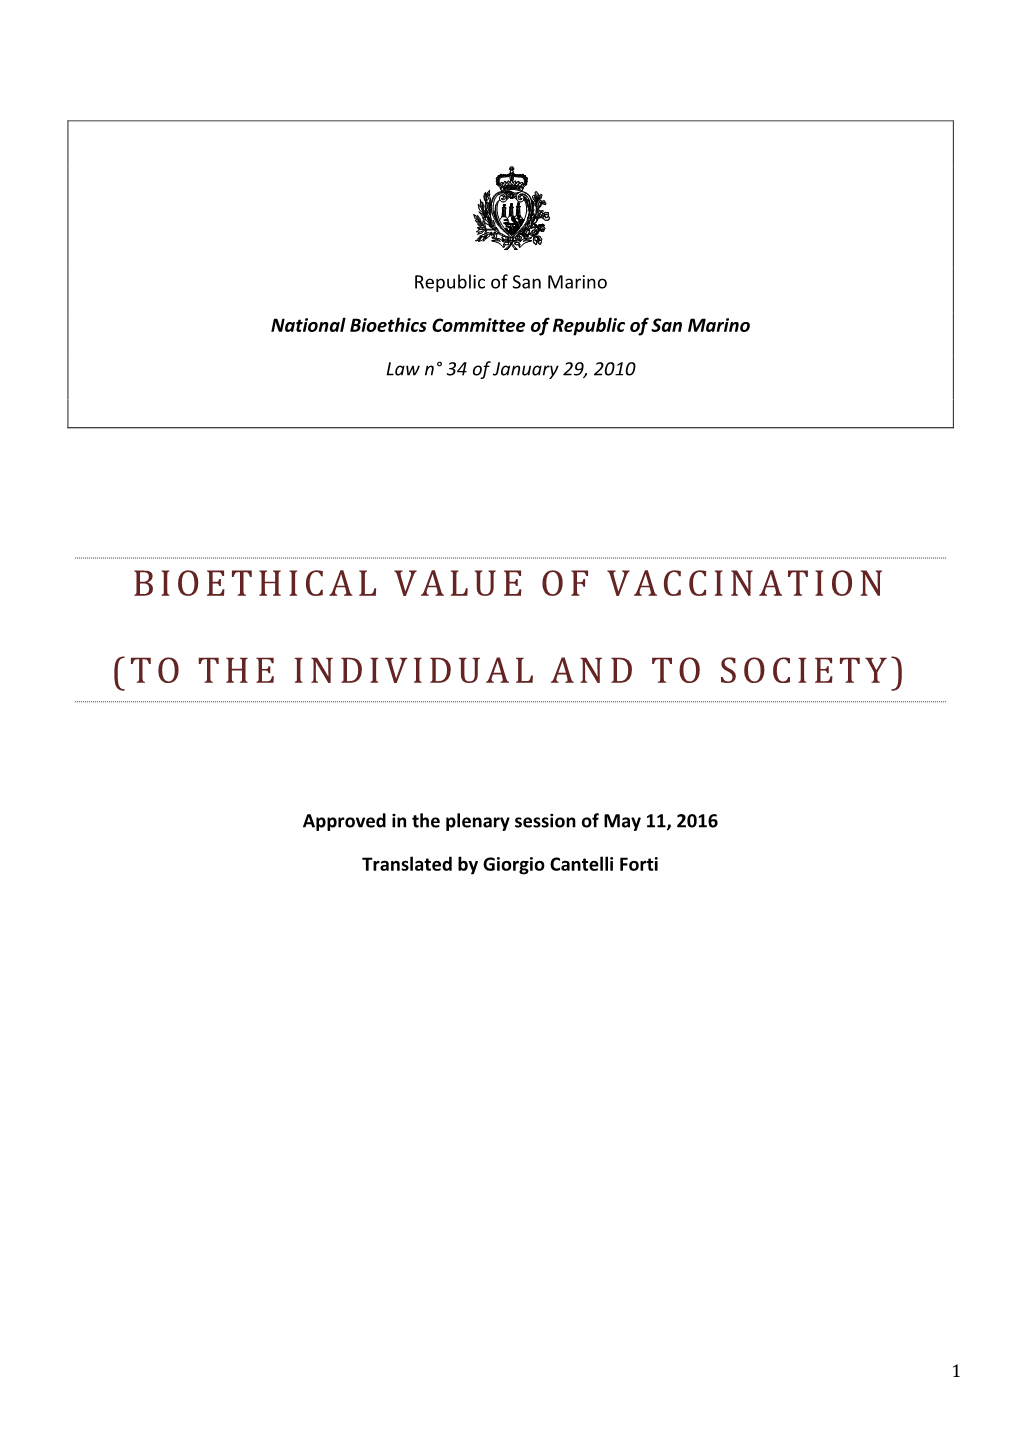 Bioethical Value of Vaccination (To the Individual and to Society)